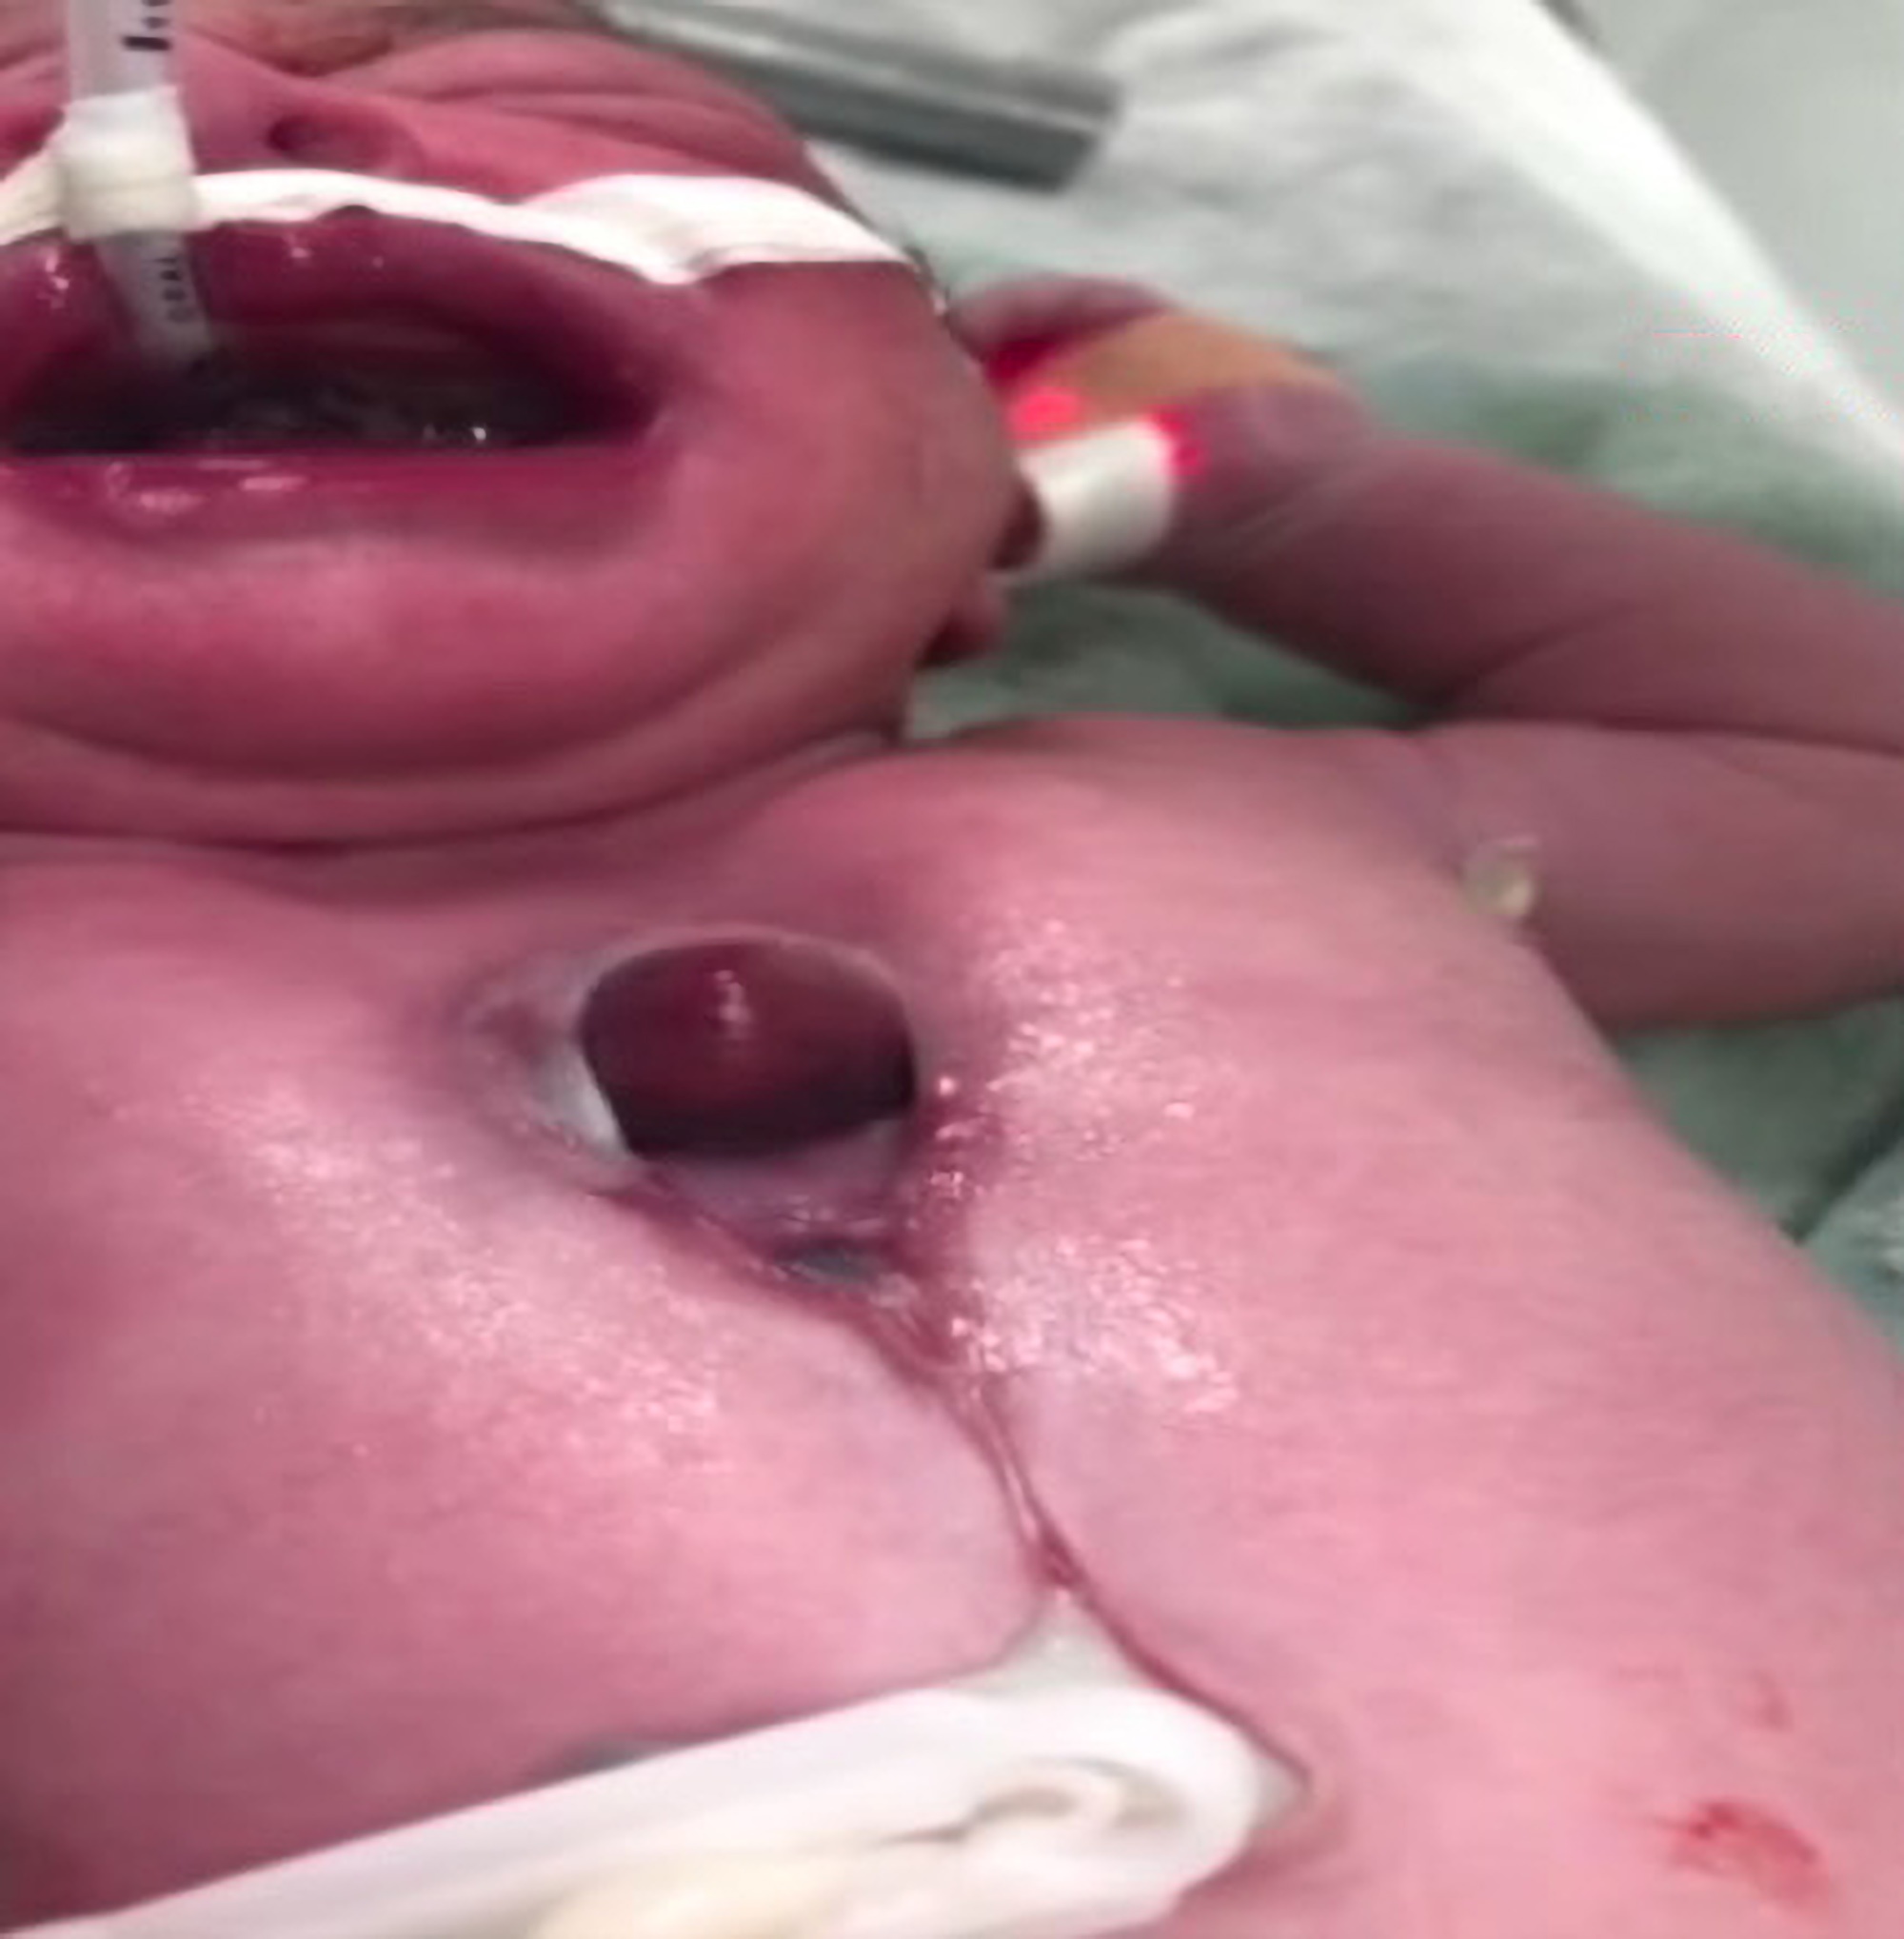 Read more about the article Doctors Save 3 Month Old Baby Who Was Born With Rare Condition That Left Heart Outside His Chest